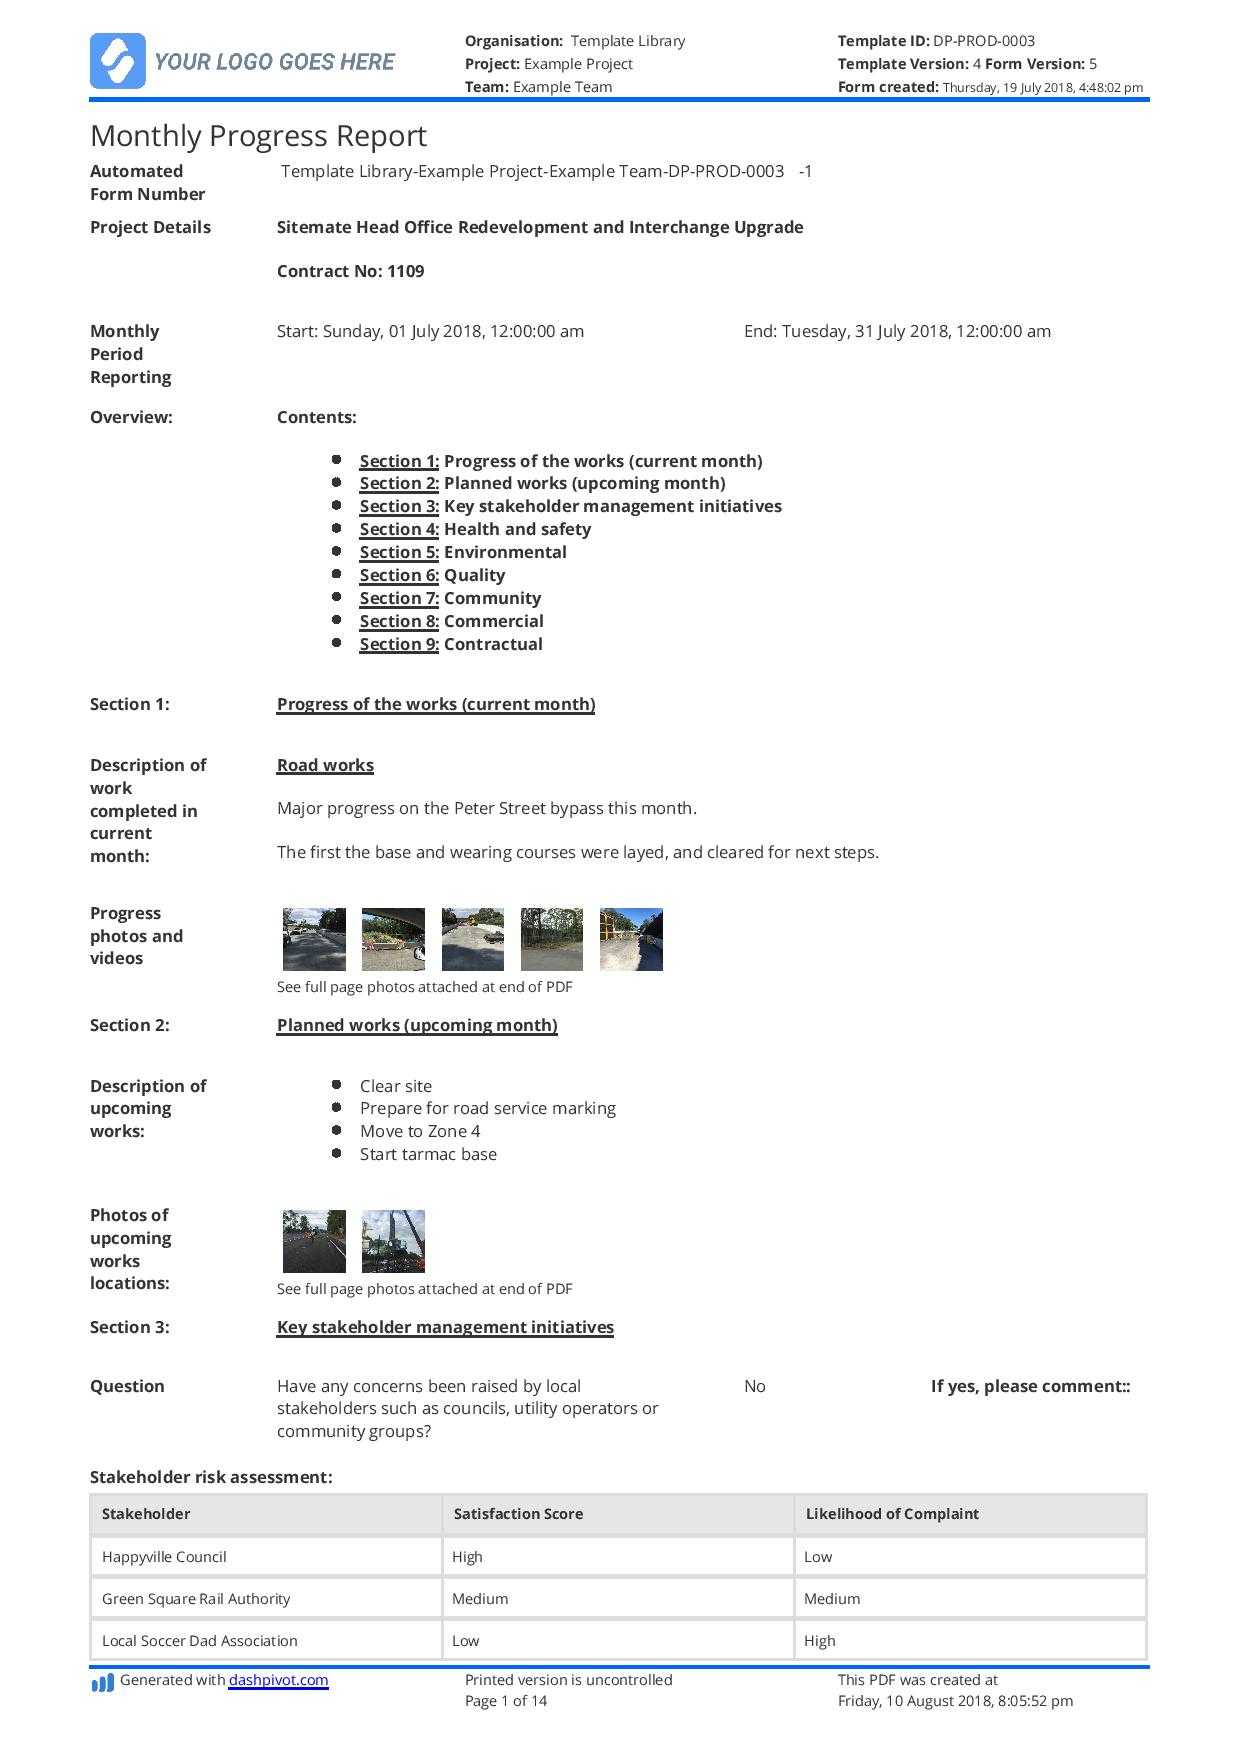 Monthly Construction Progress Report Template: Use This For Construction Daily Progress Report Template